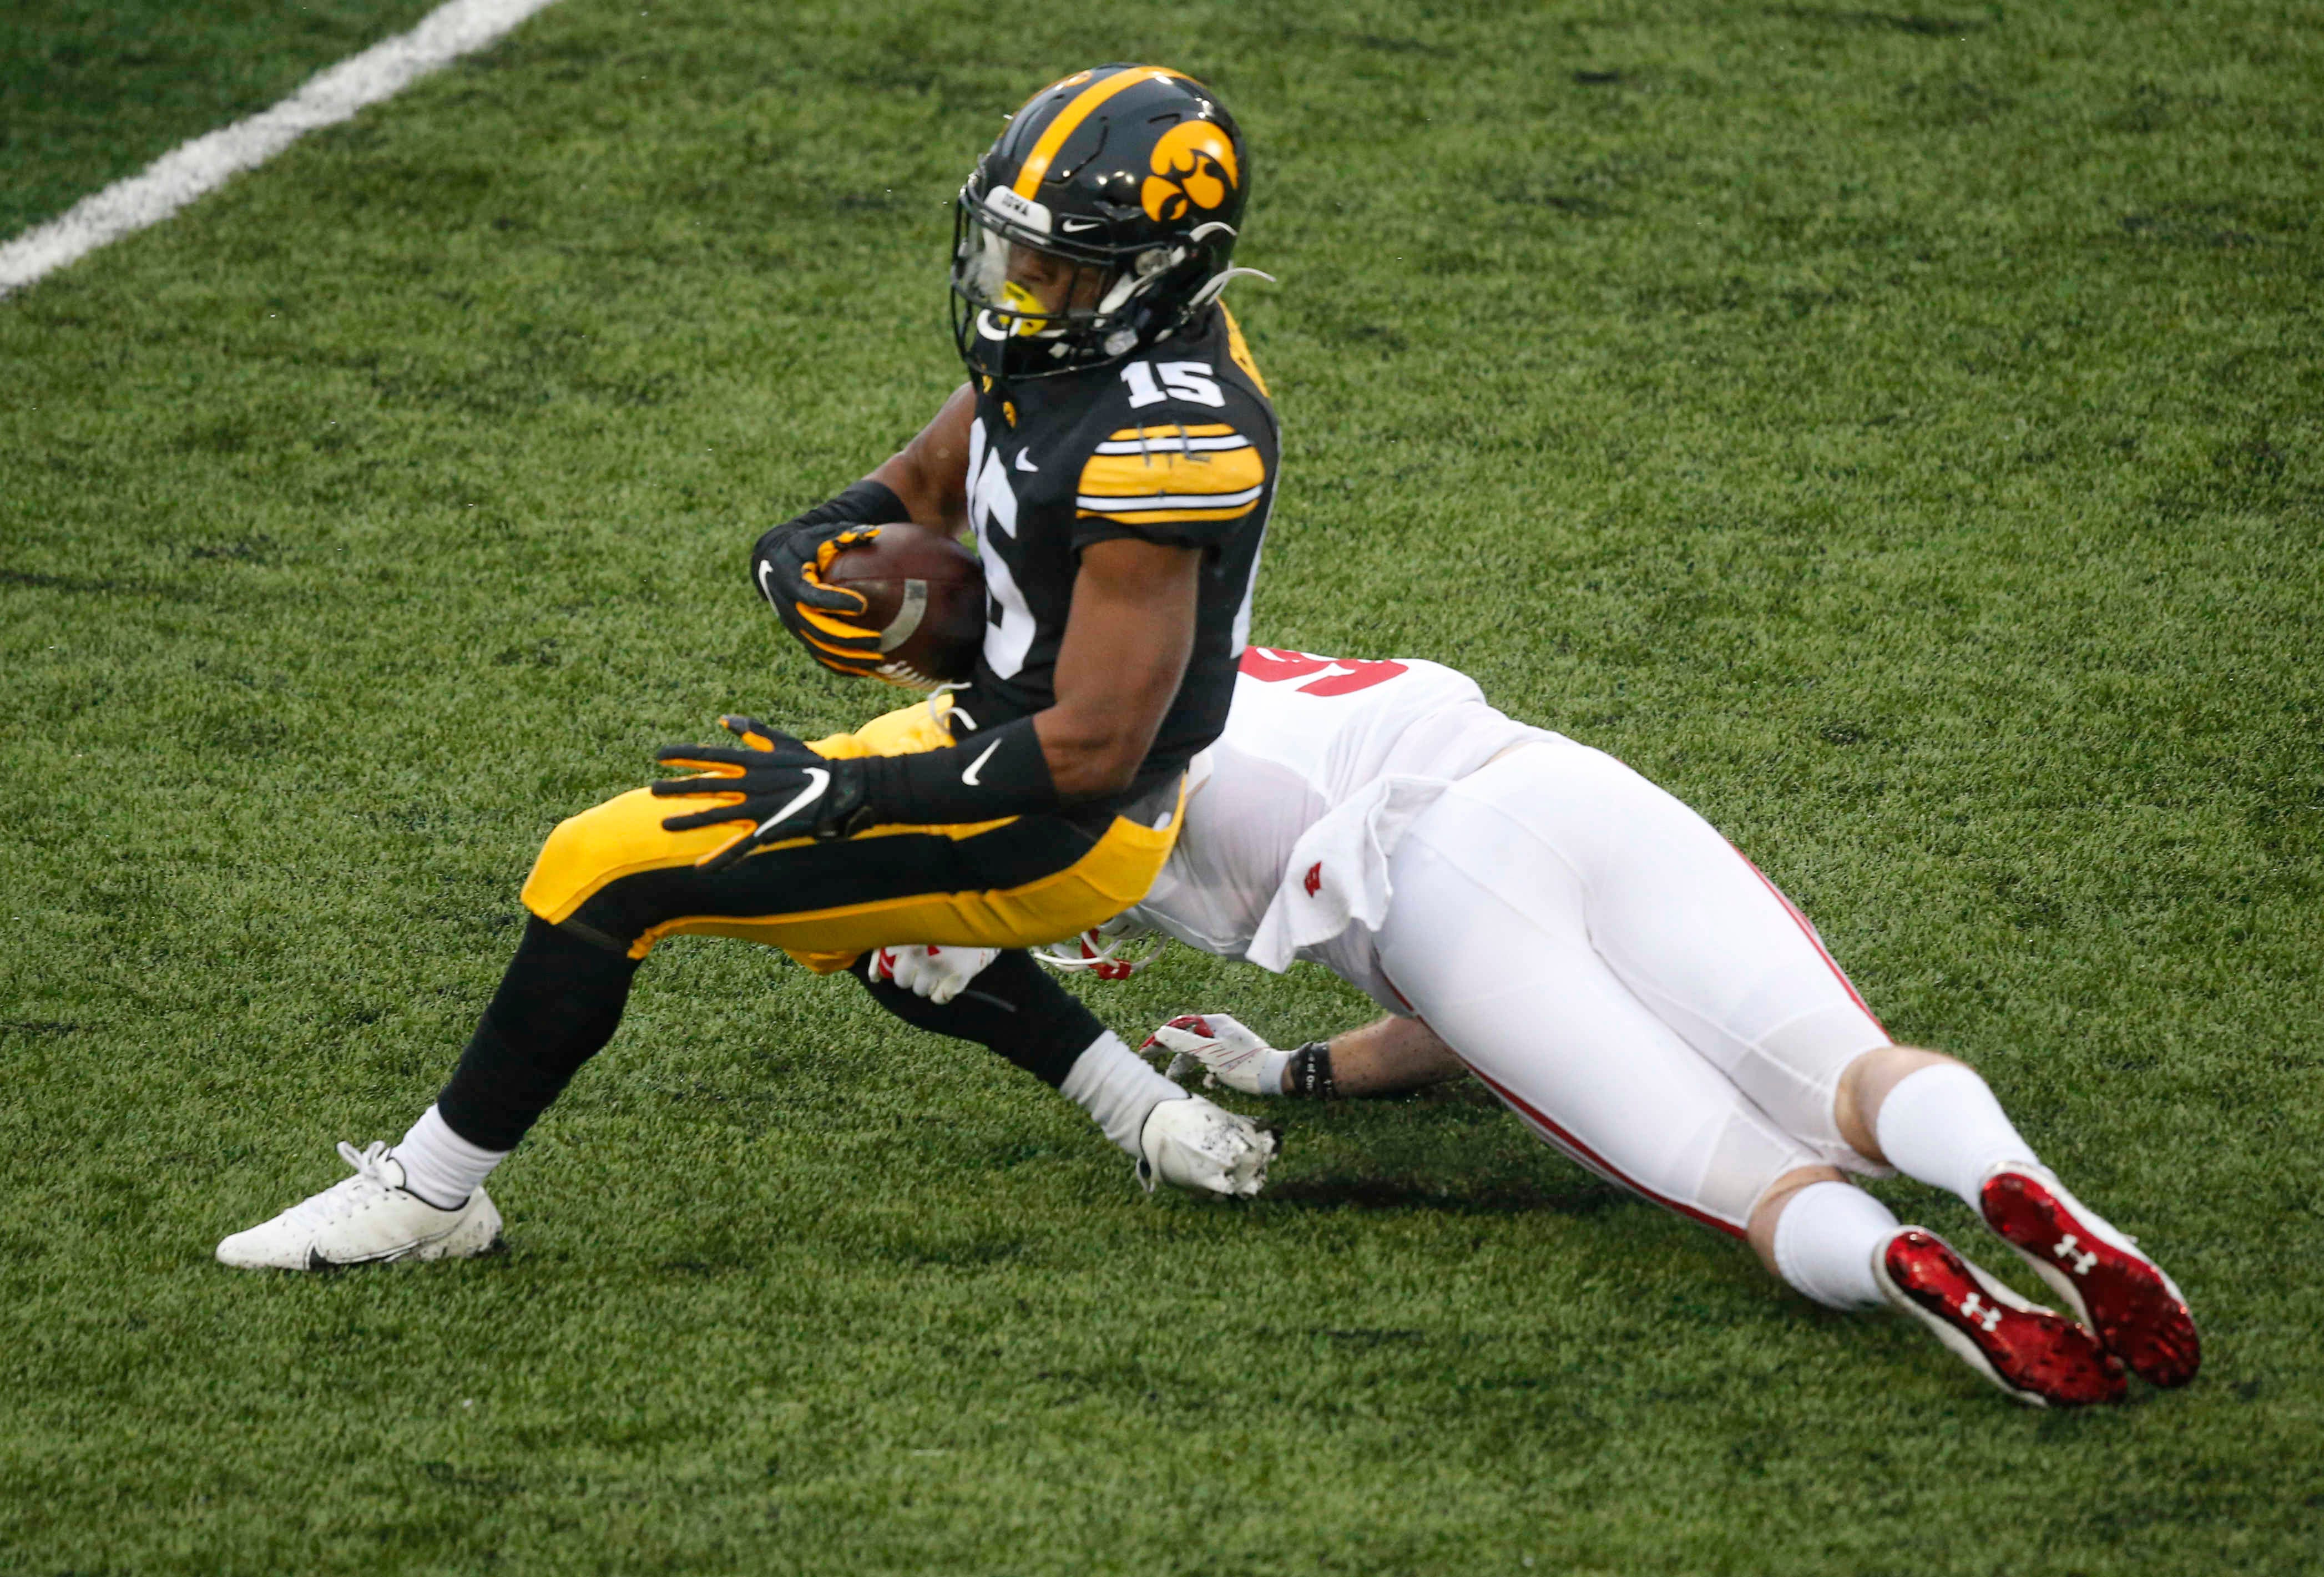 Iowa sophomore running back Tyler Goodson spins away from a tackle in the second quarter against Wisconsin on Saturday, Dec. 12, 2020, at Kinnick Stadium in Iowa City, Iowa.